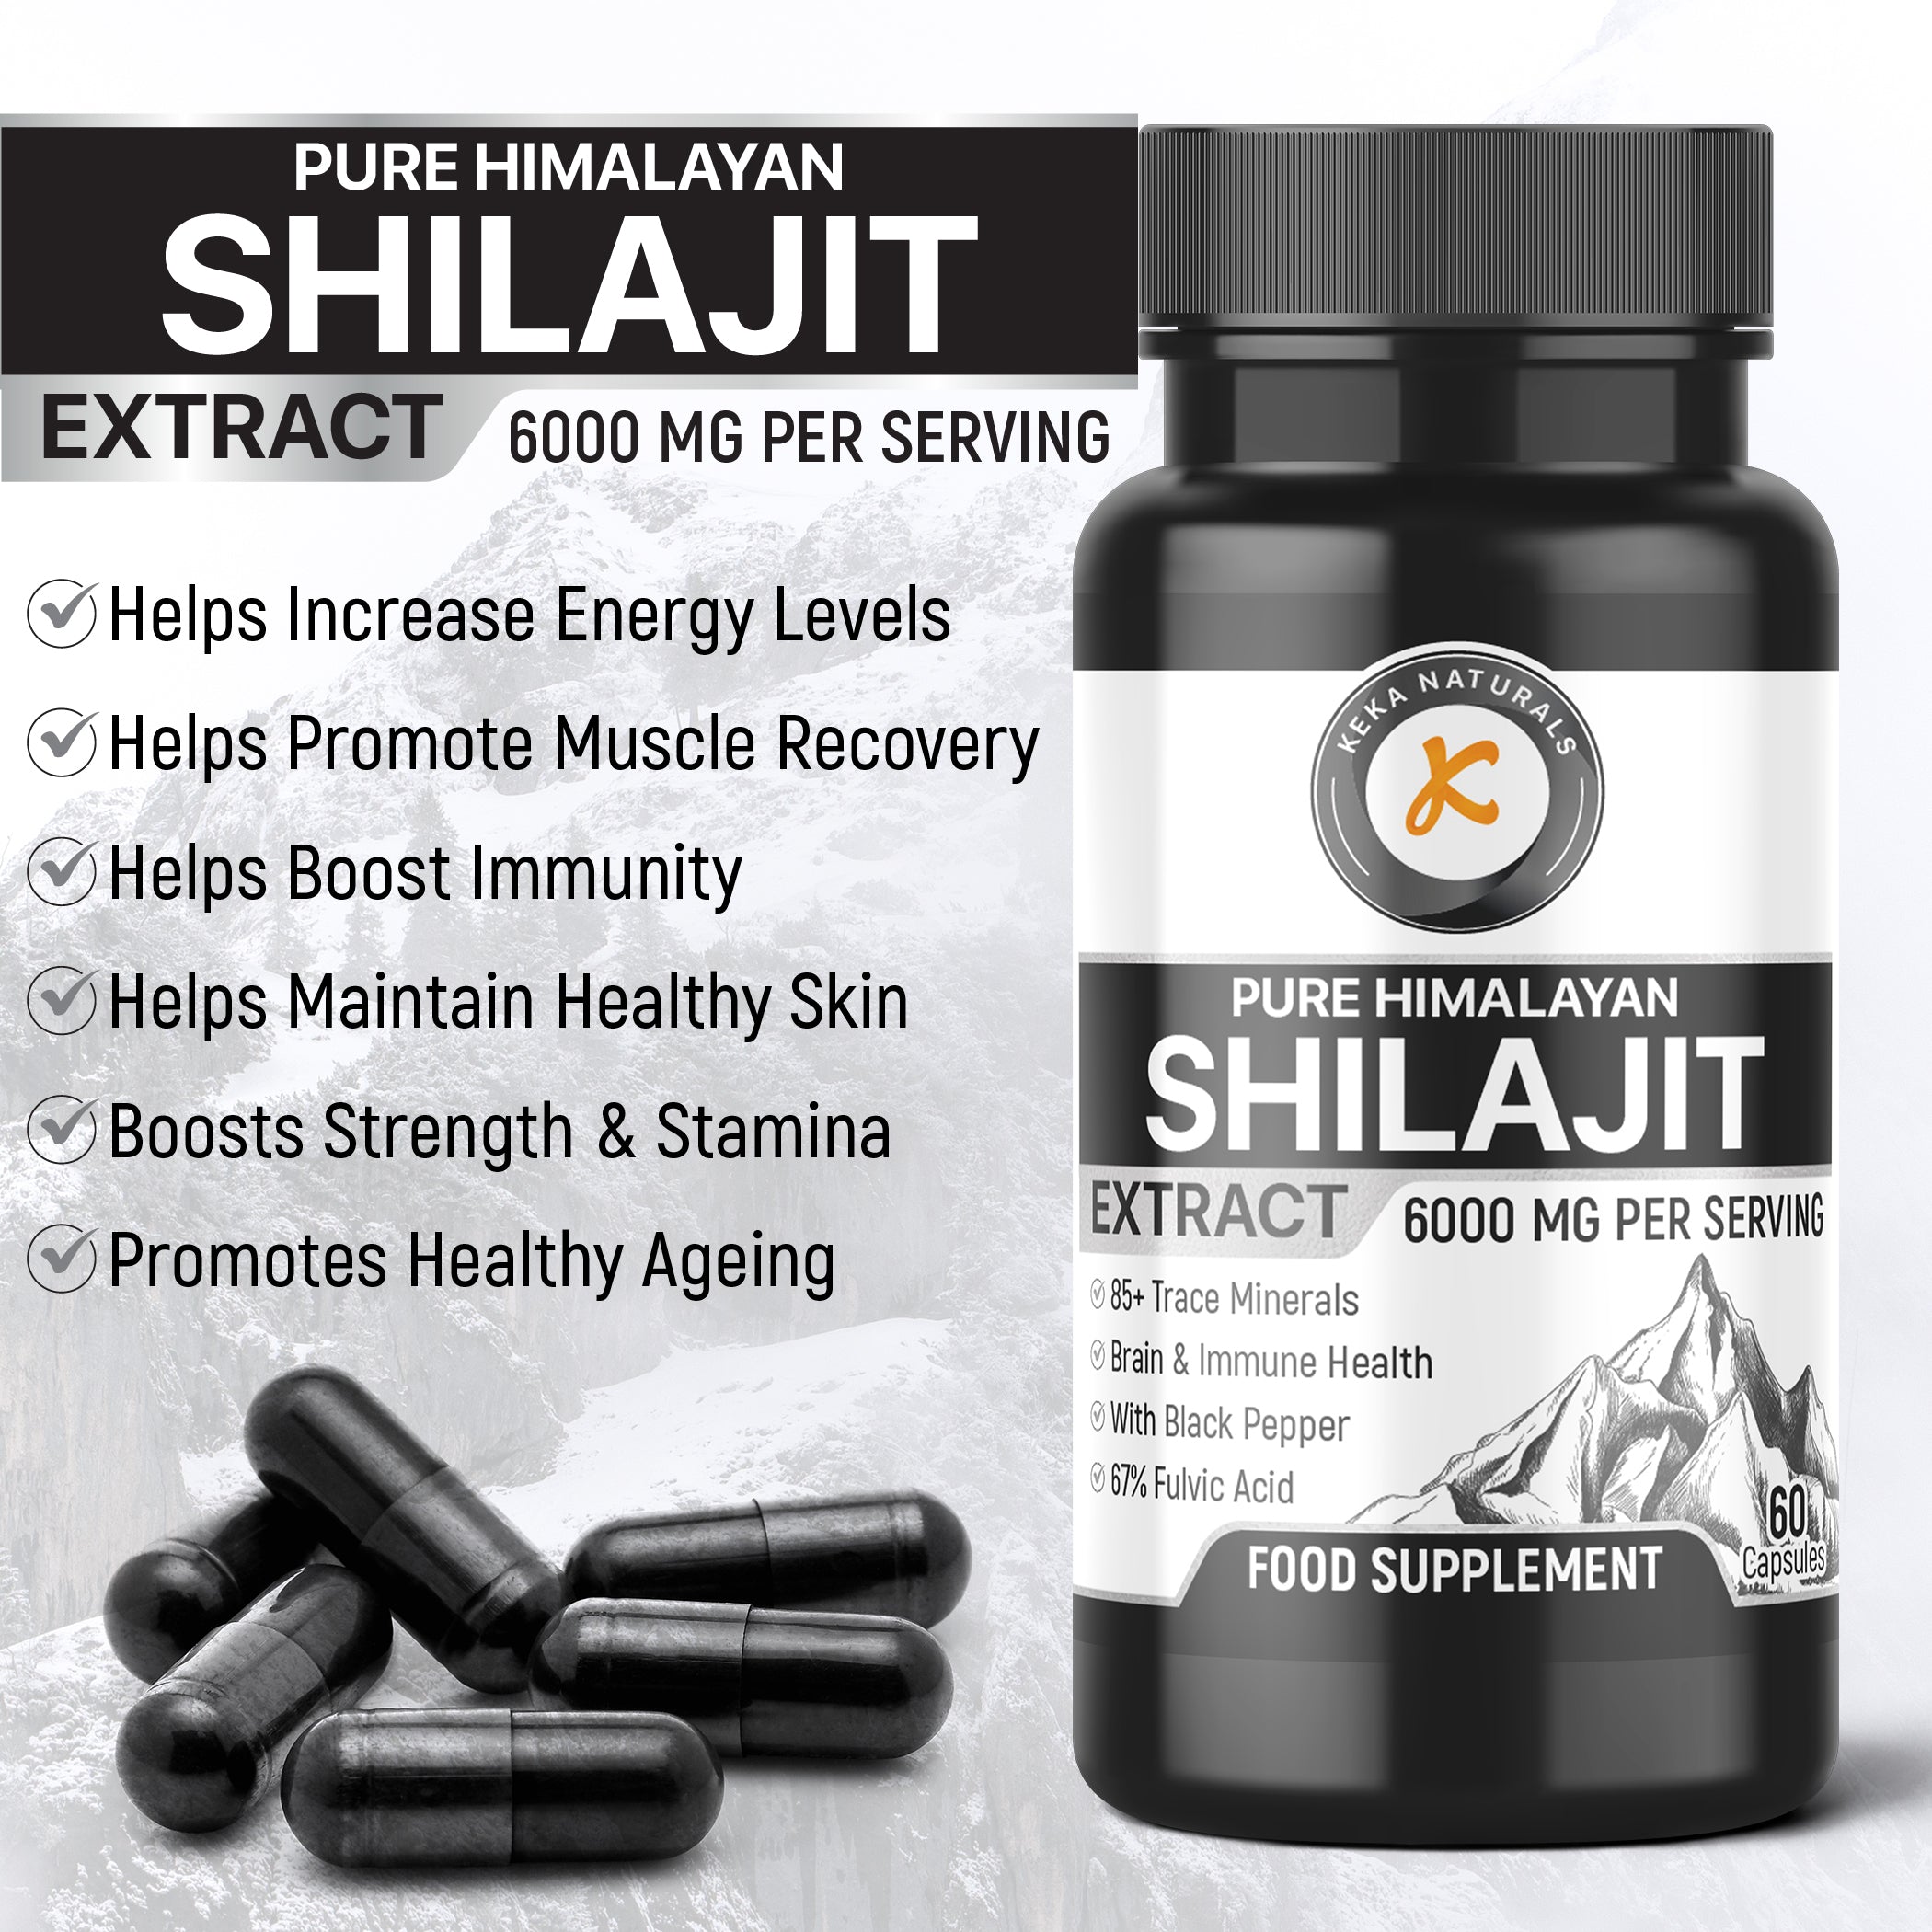 pure himalayan Shilajit Extract 6000mg benefits promotes healthy ageing and increase energy levels